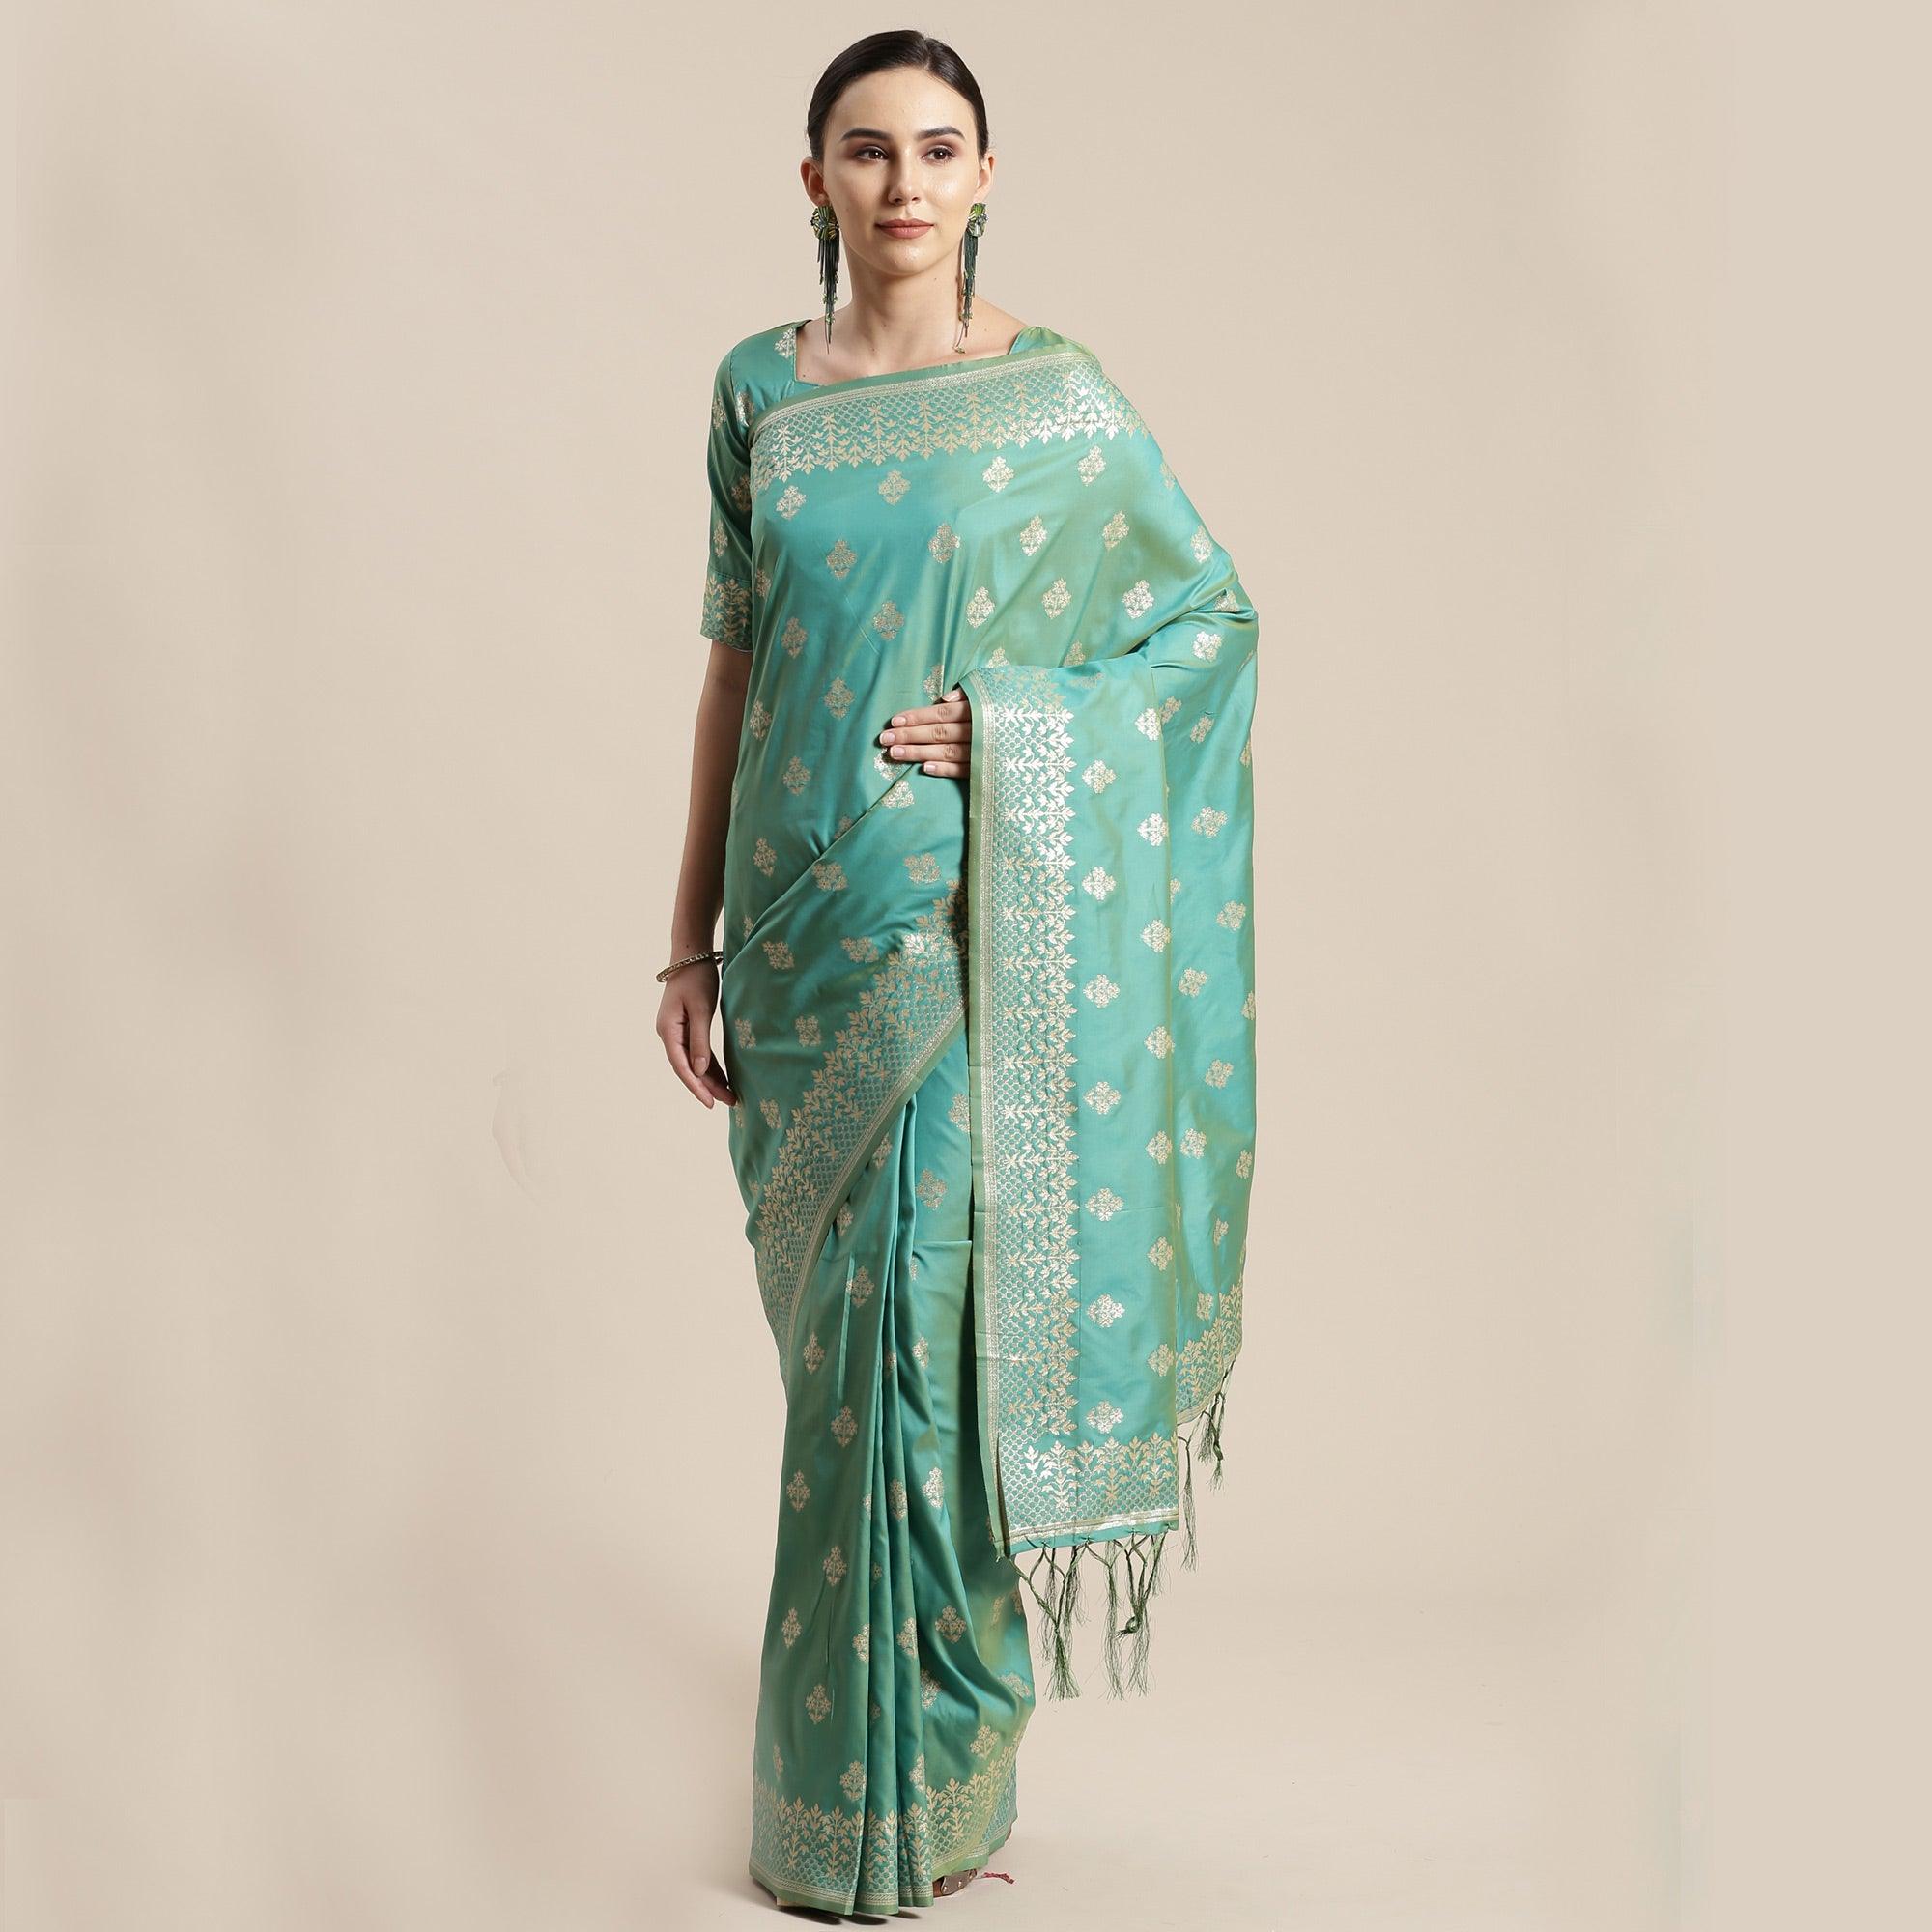 Mesmerising Sea Green Colored Festive Wear Silk Blend Woven Floral Saree With Tassels - Peachmode